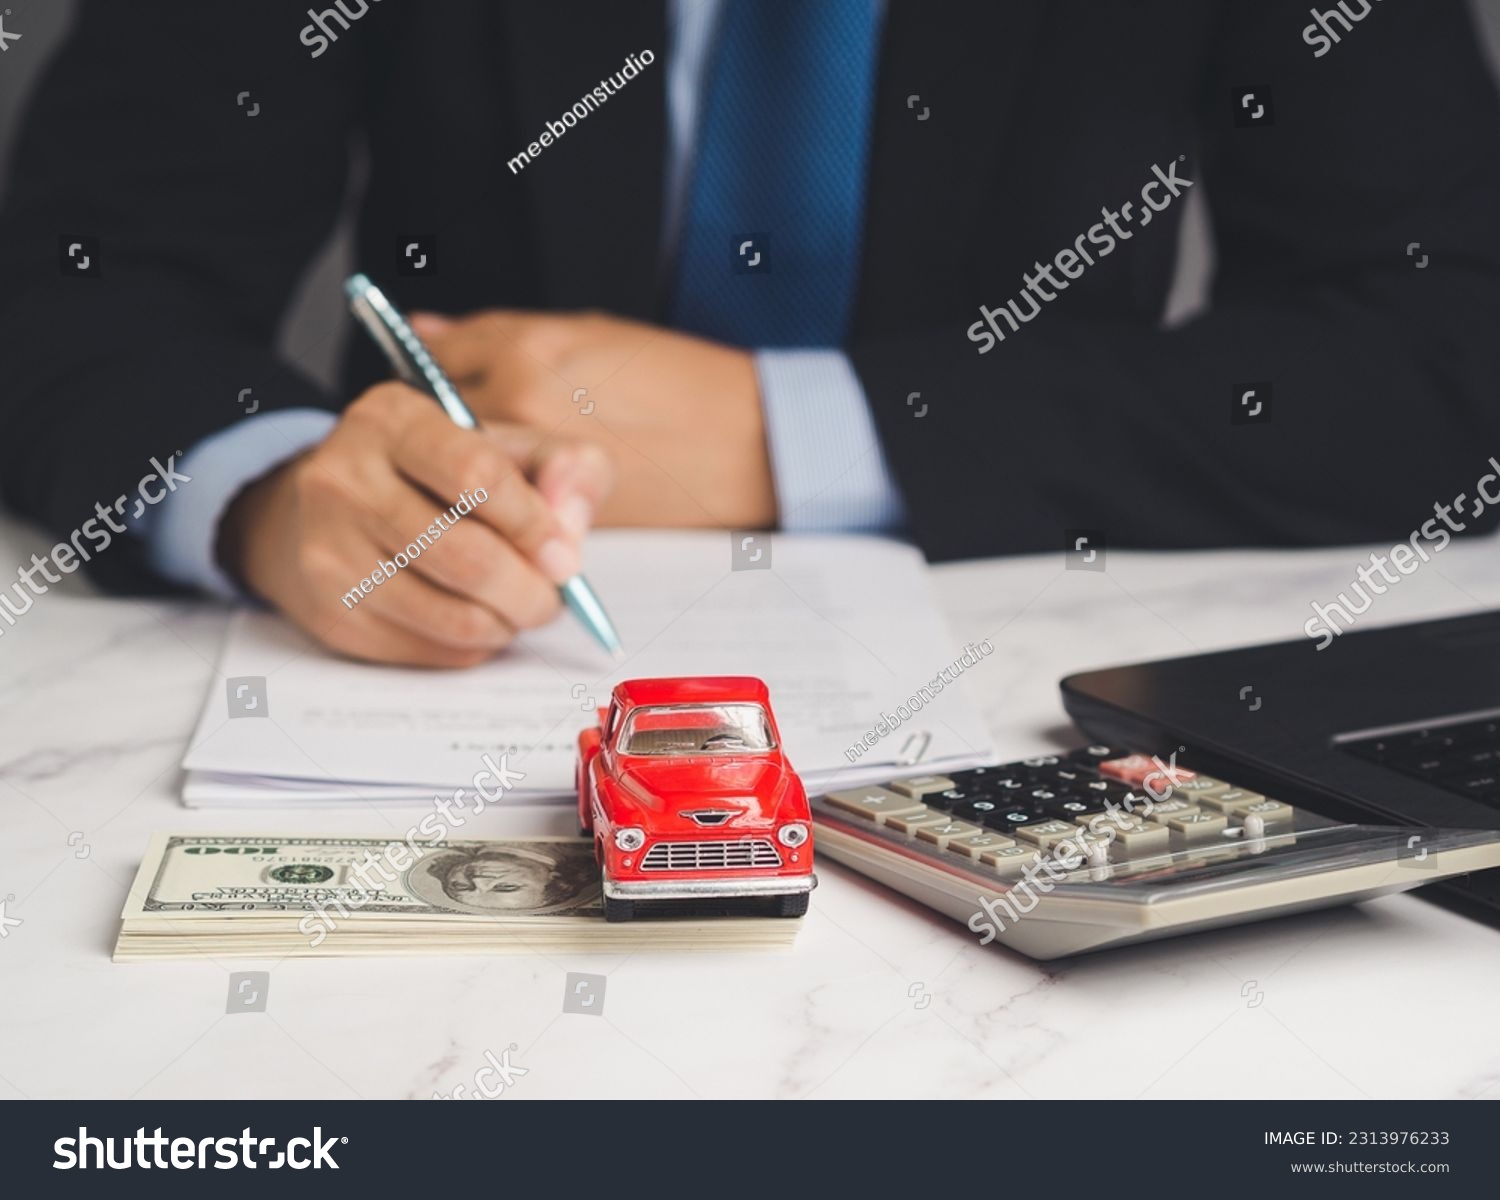 Auto title loan or Car loan. A Businessman signs a contract loan agreement while sitting at the table. Mini a red car model, a calculator, and a laptop on a table. Car finance and insurance concept #2313976233